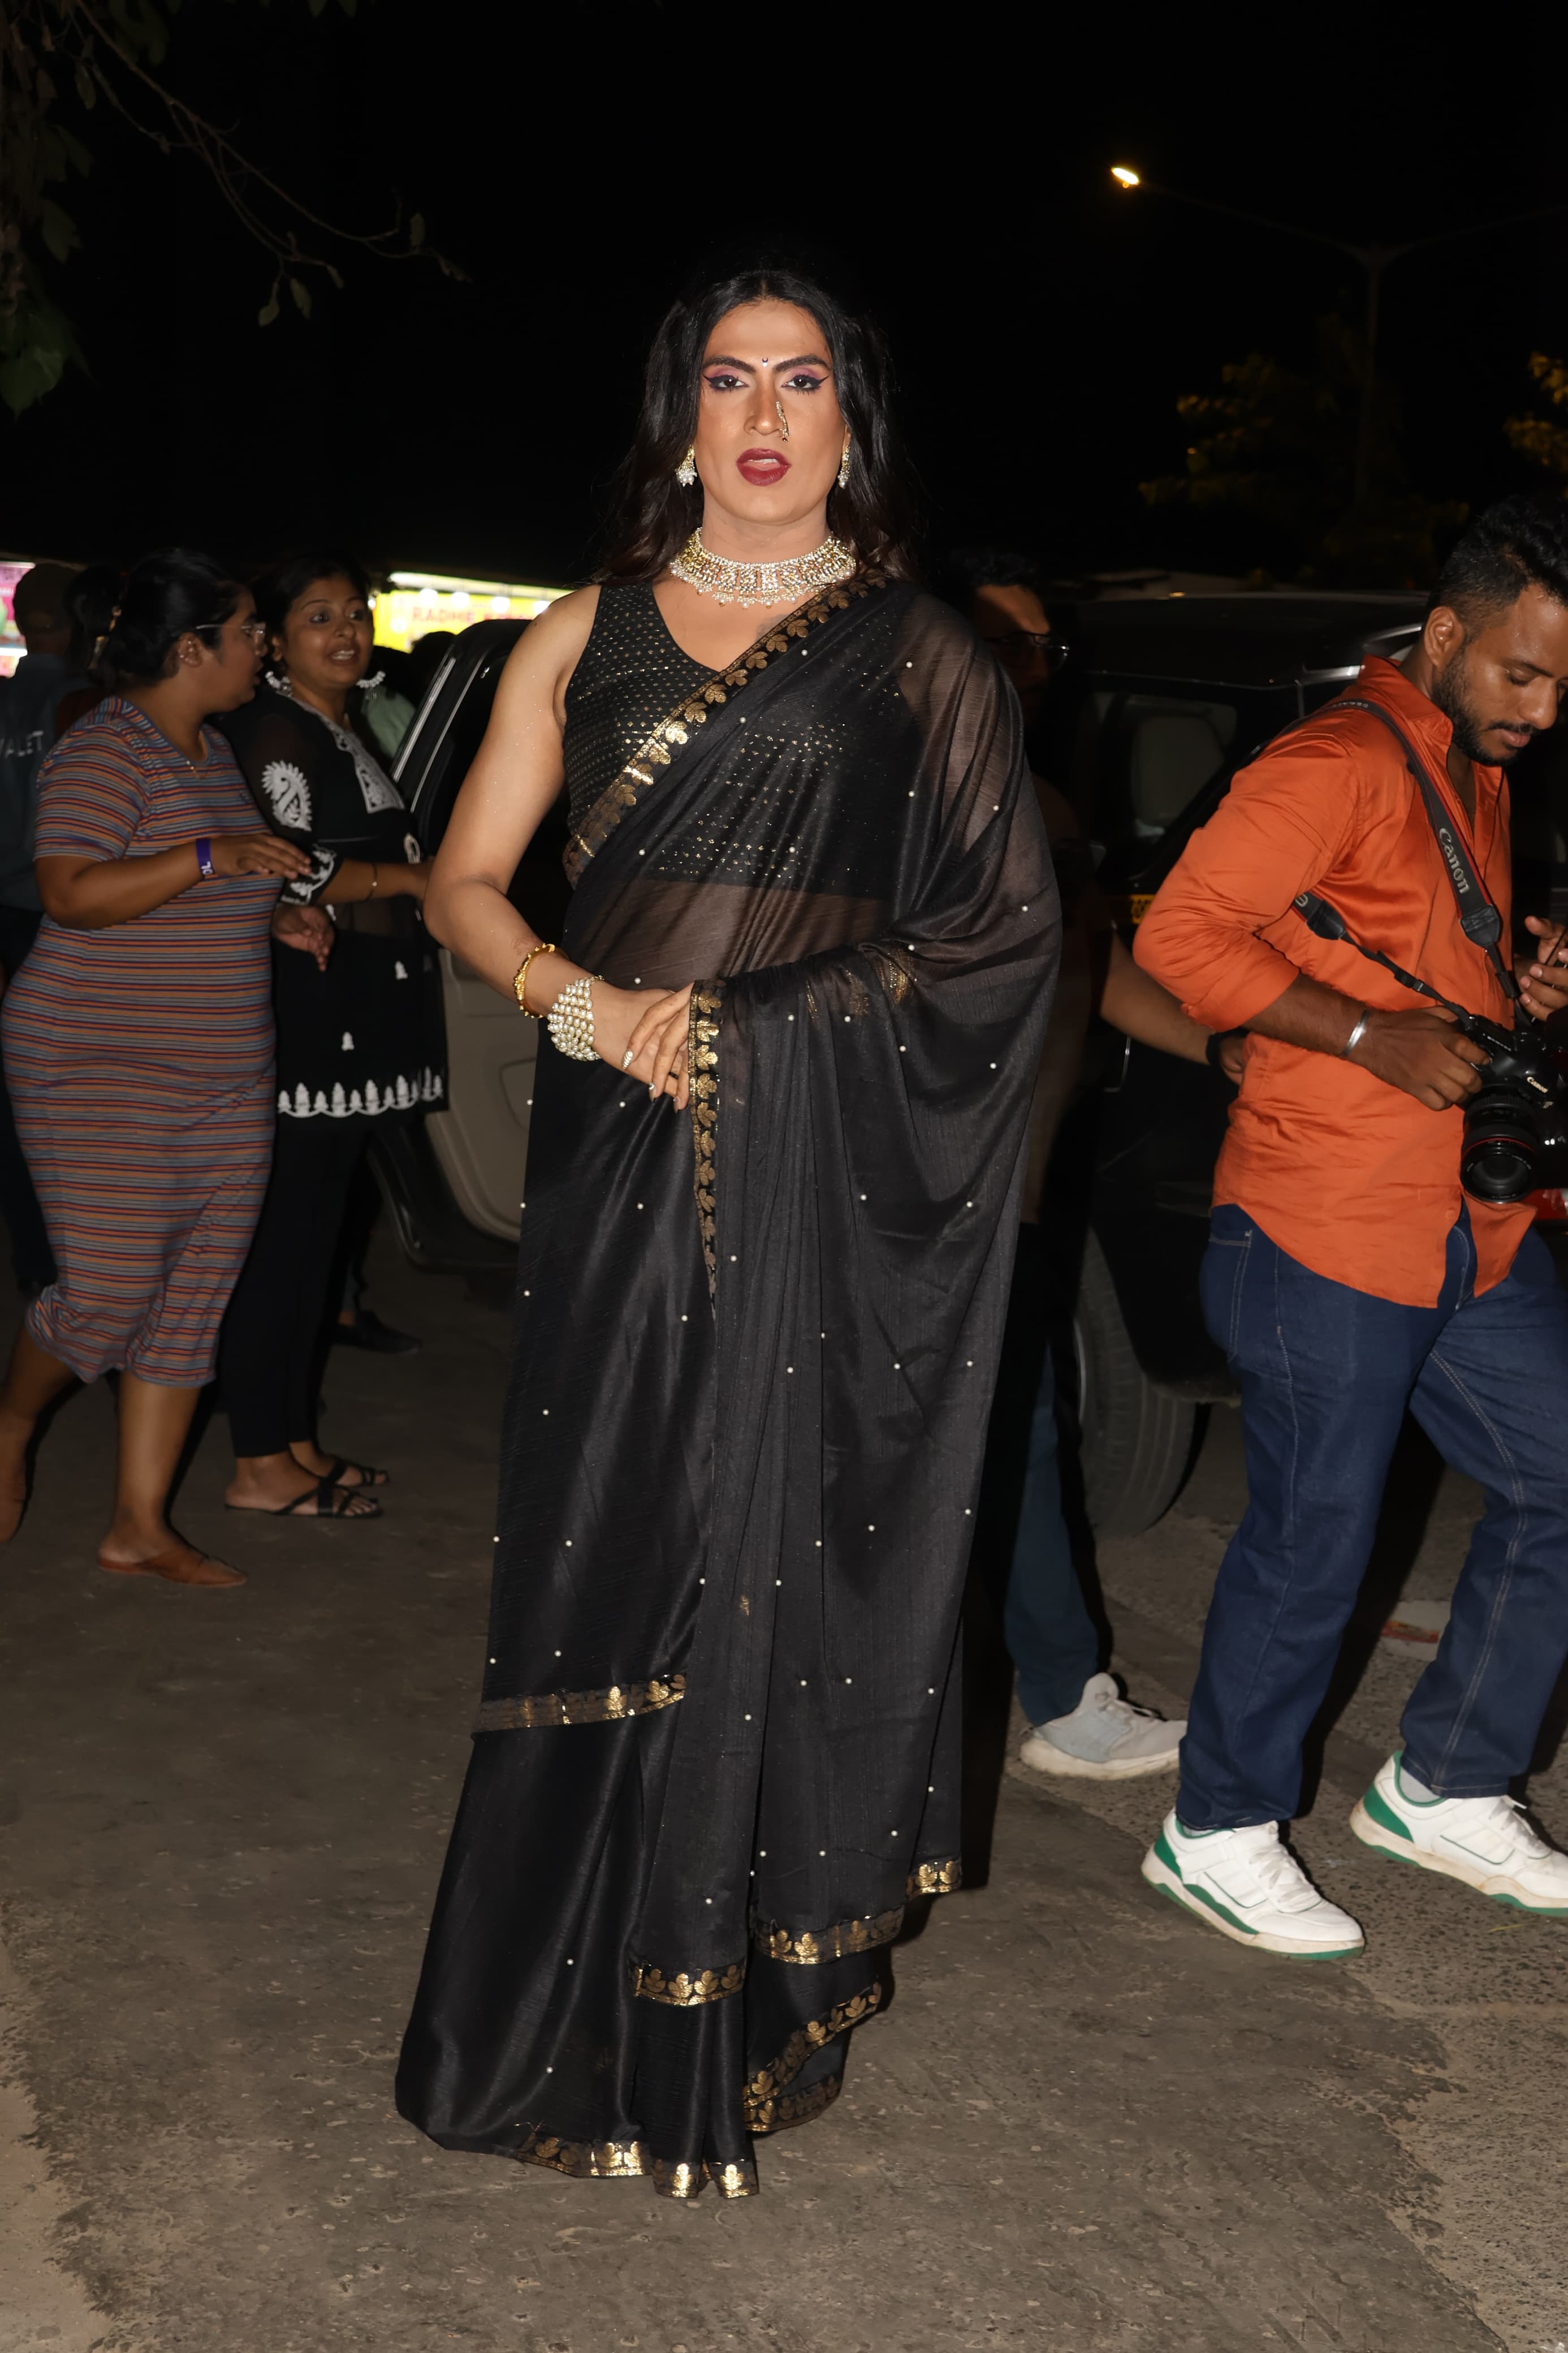 Sushant Divgikar aka Rani Ko-HE-Nur stunned in a black tissue saree and paired it with stylish pearl jewellery to ace her look